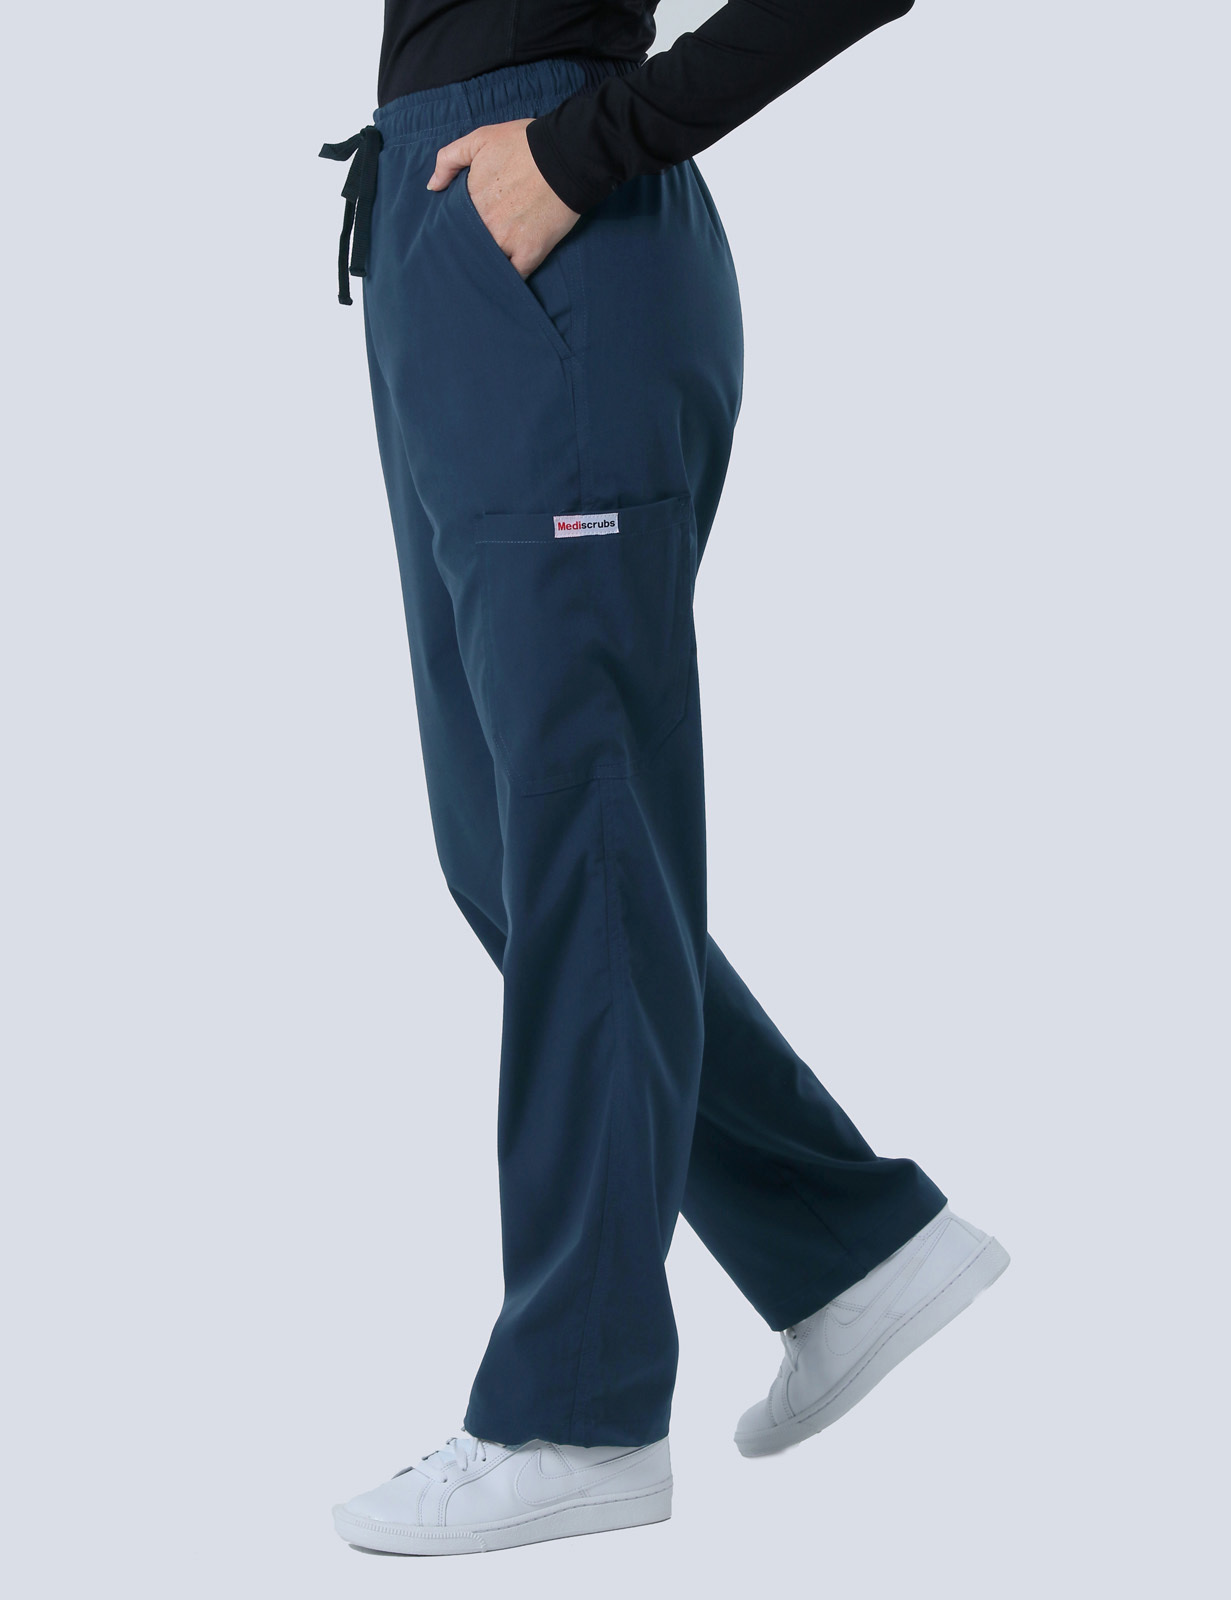 Weipa Hospital - ED CN (Women's Fit Spandex Scrub Top and Cargo Pants in Navy incl Logos)